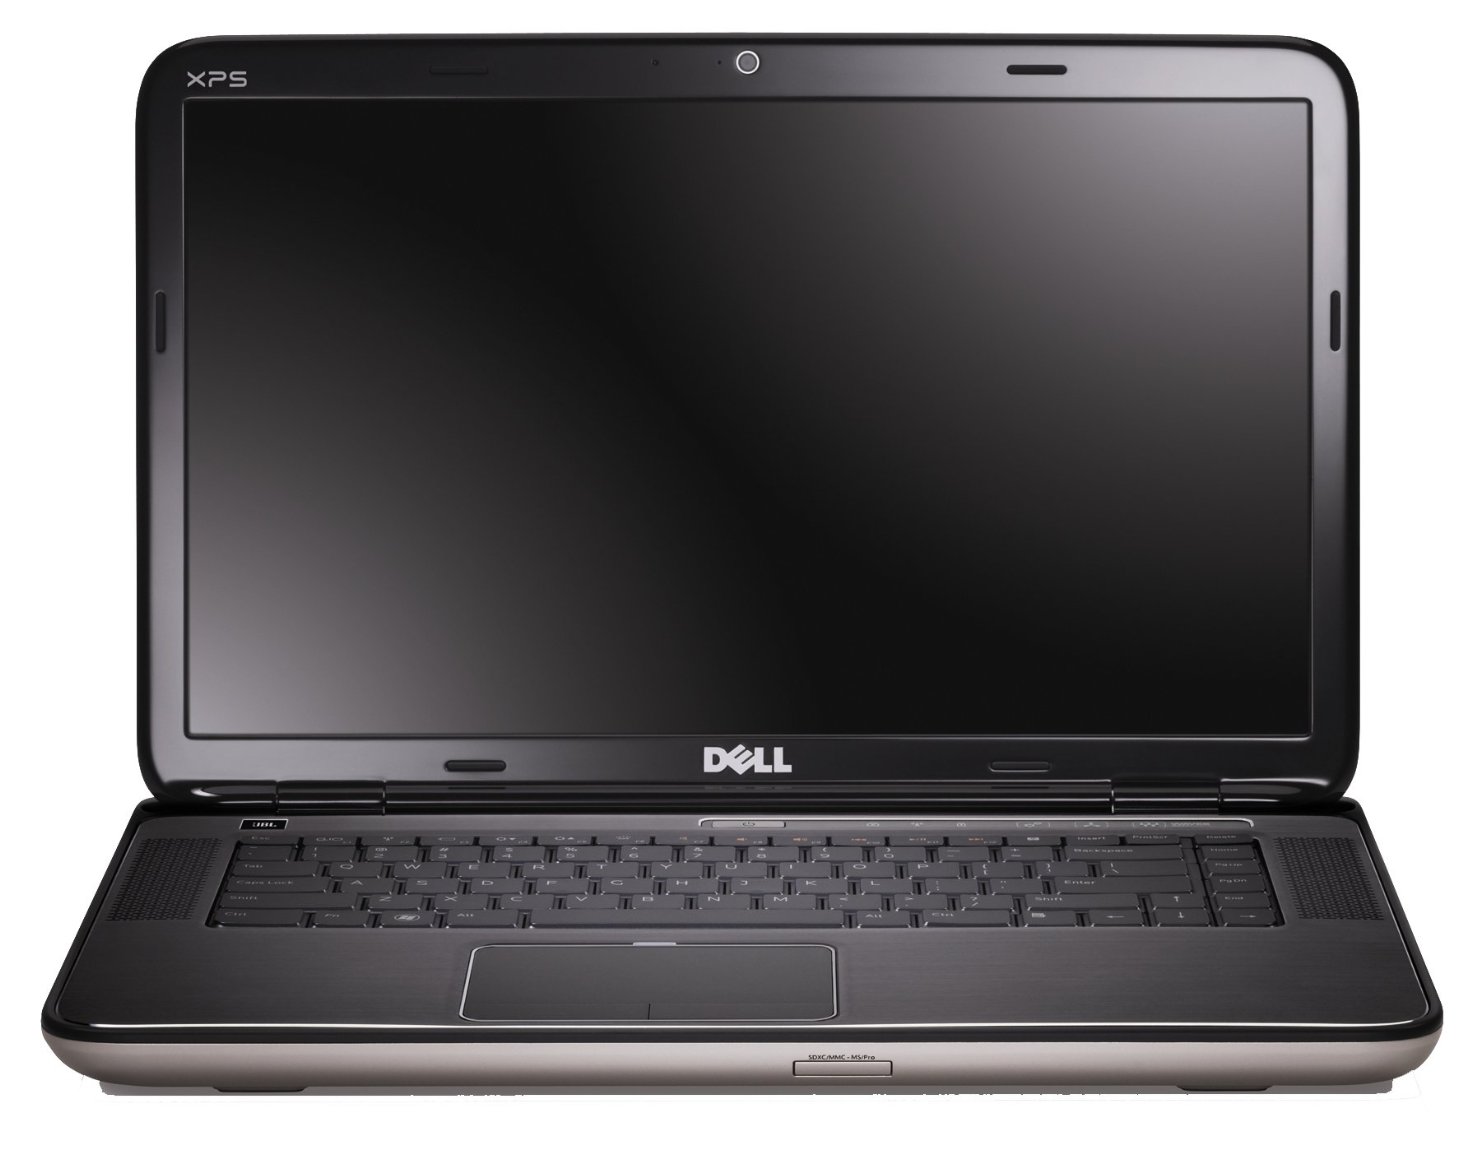   Dell XPS 15 (7590-6664)  1